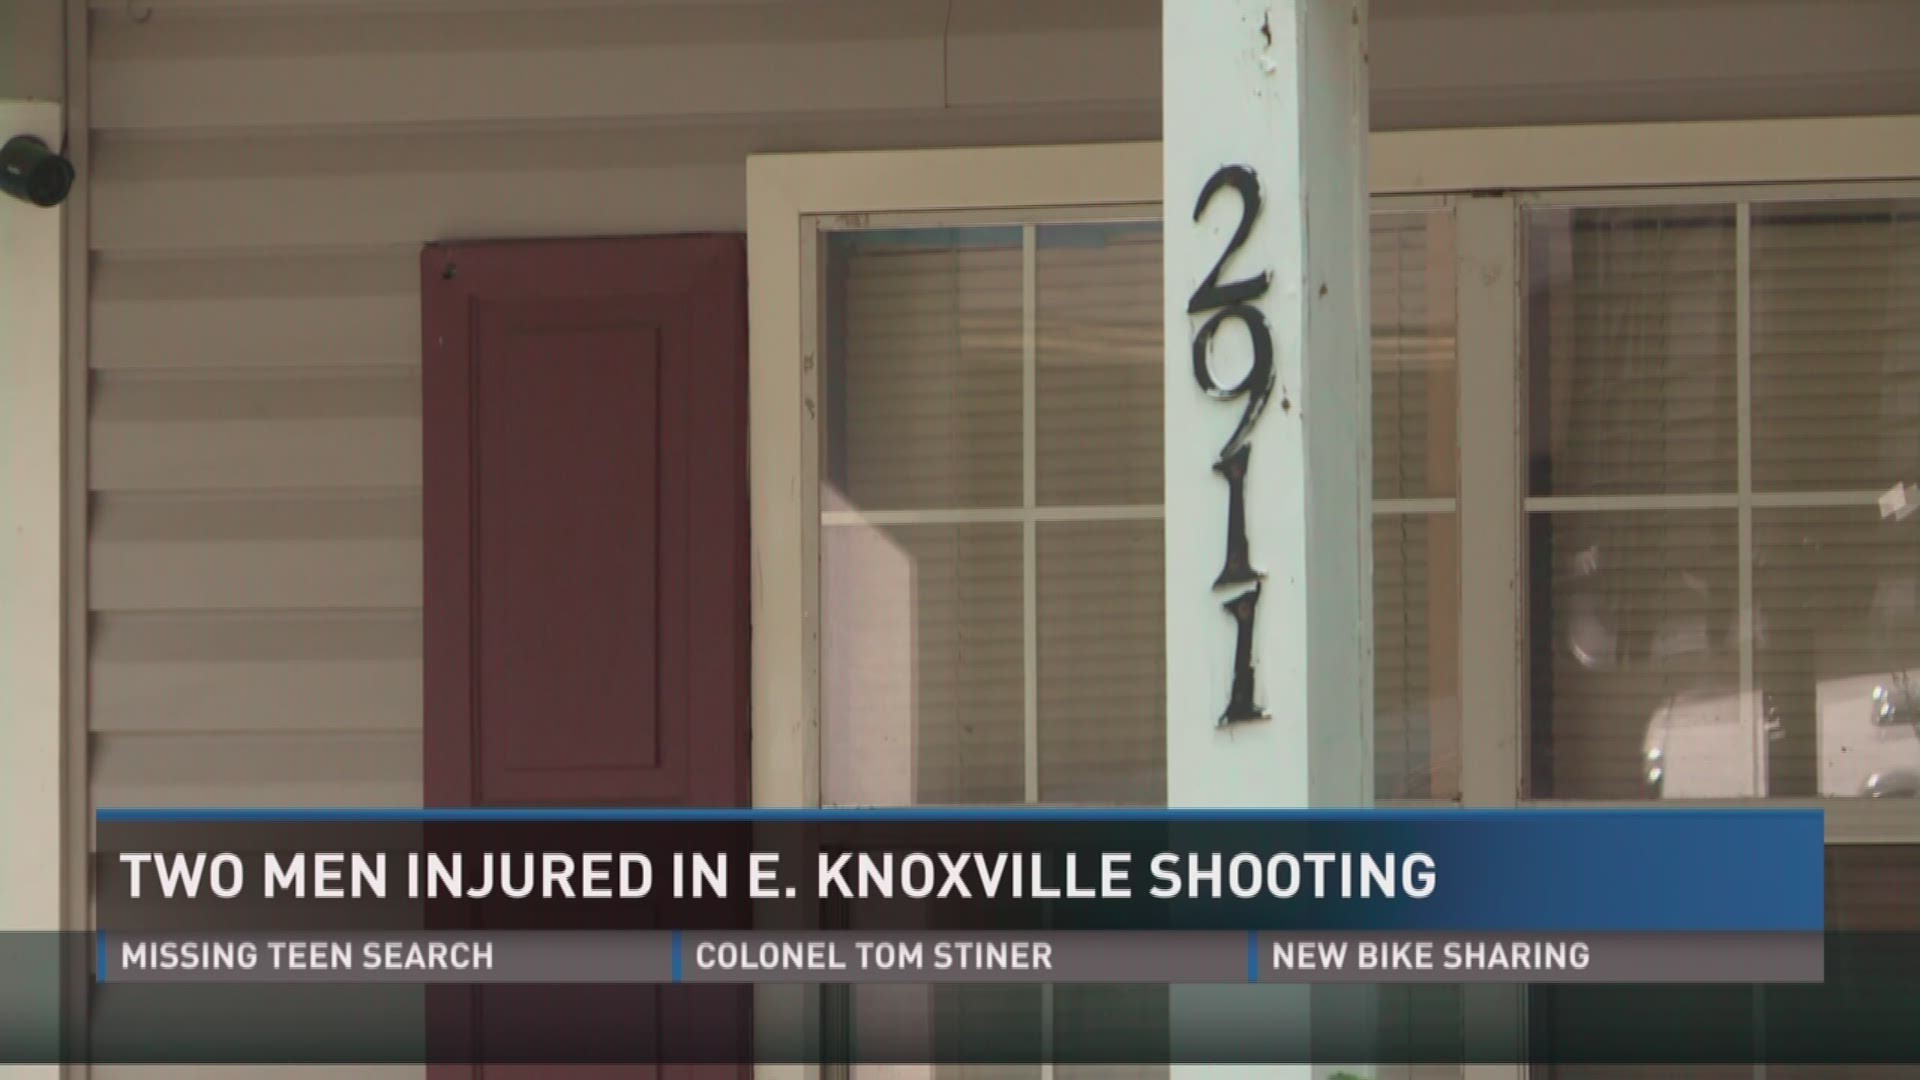 Aug. 16, 2017: Knoxville Police say two men were injured in a shooting while committing a crime at a home in East Knoxville.